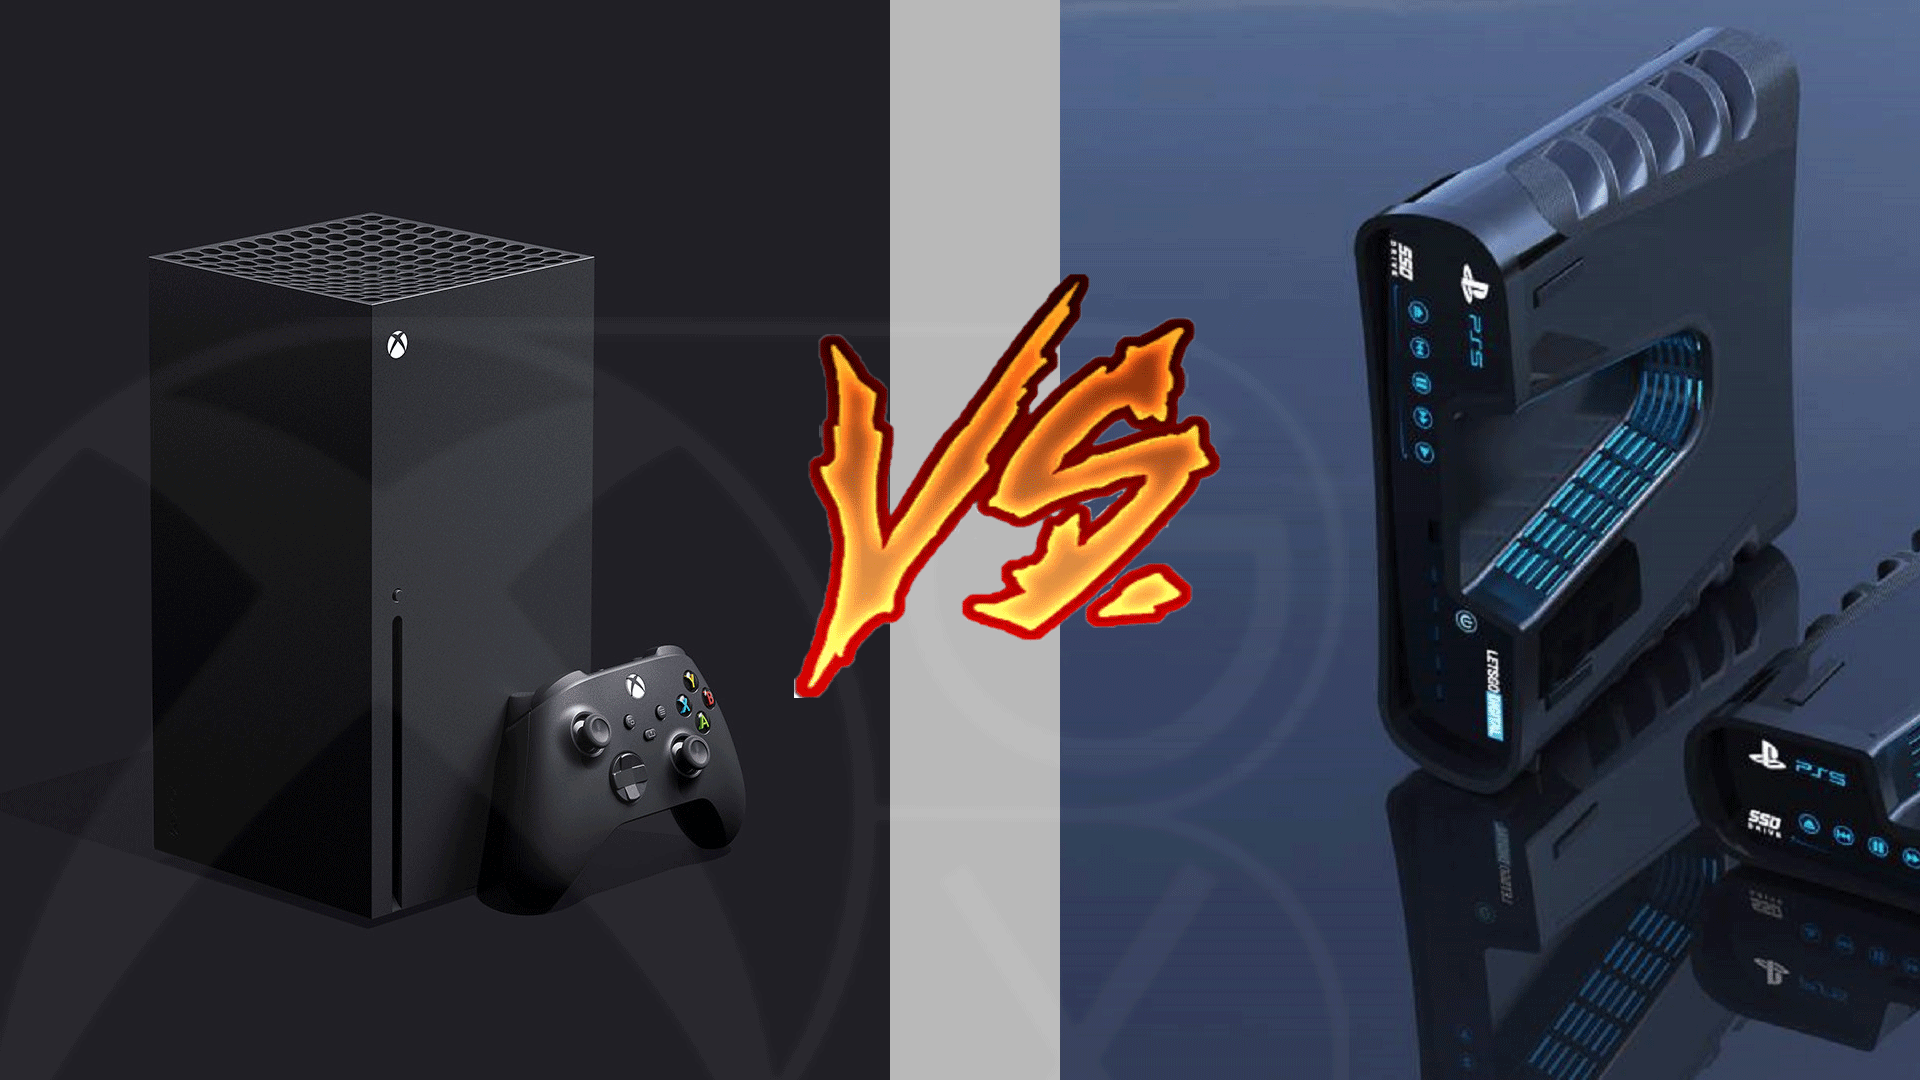 Xbox Series X vs PS5: The Battle Of Gaming Powerhouses